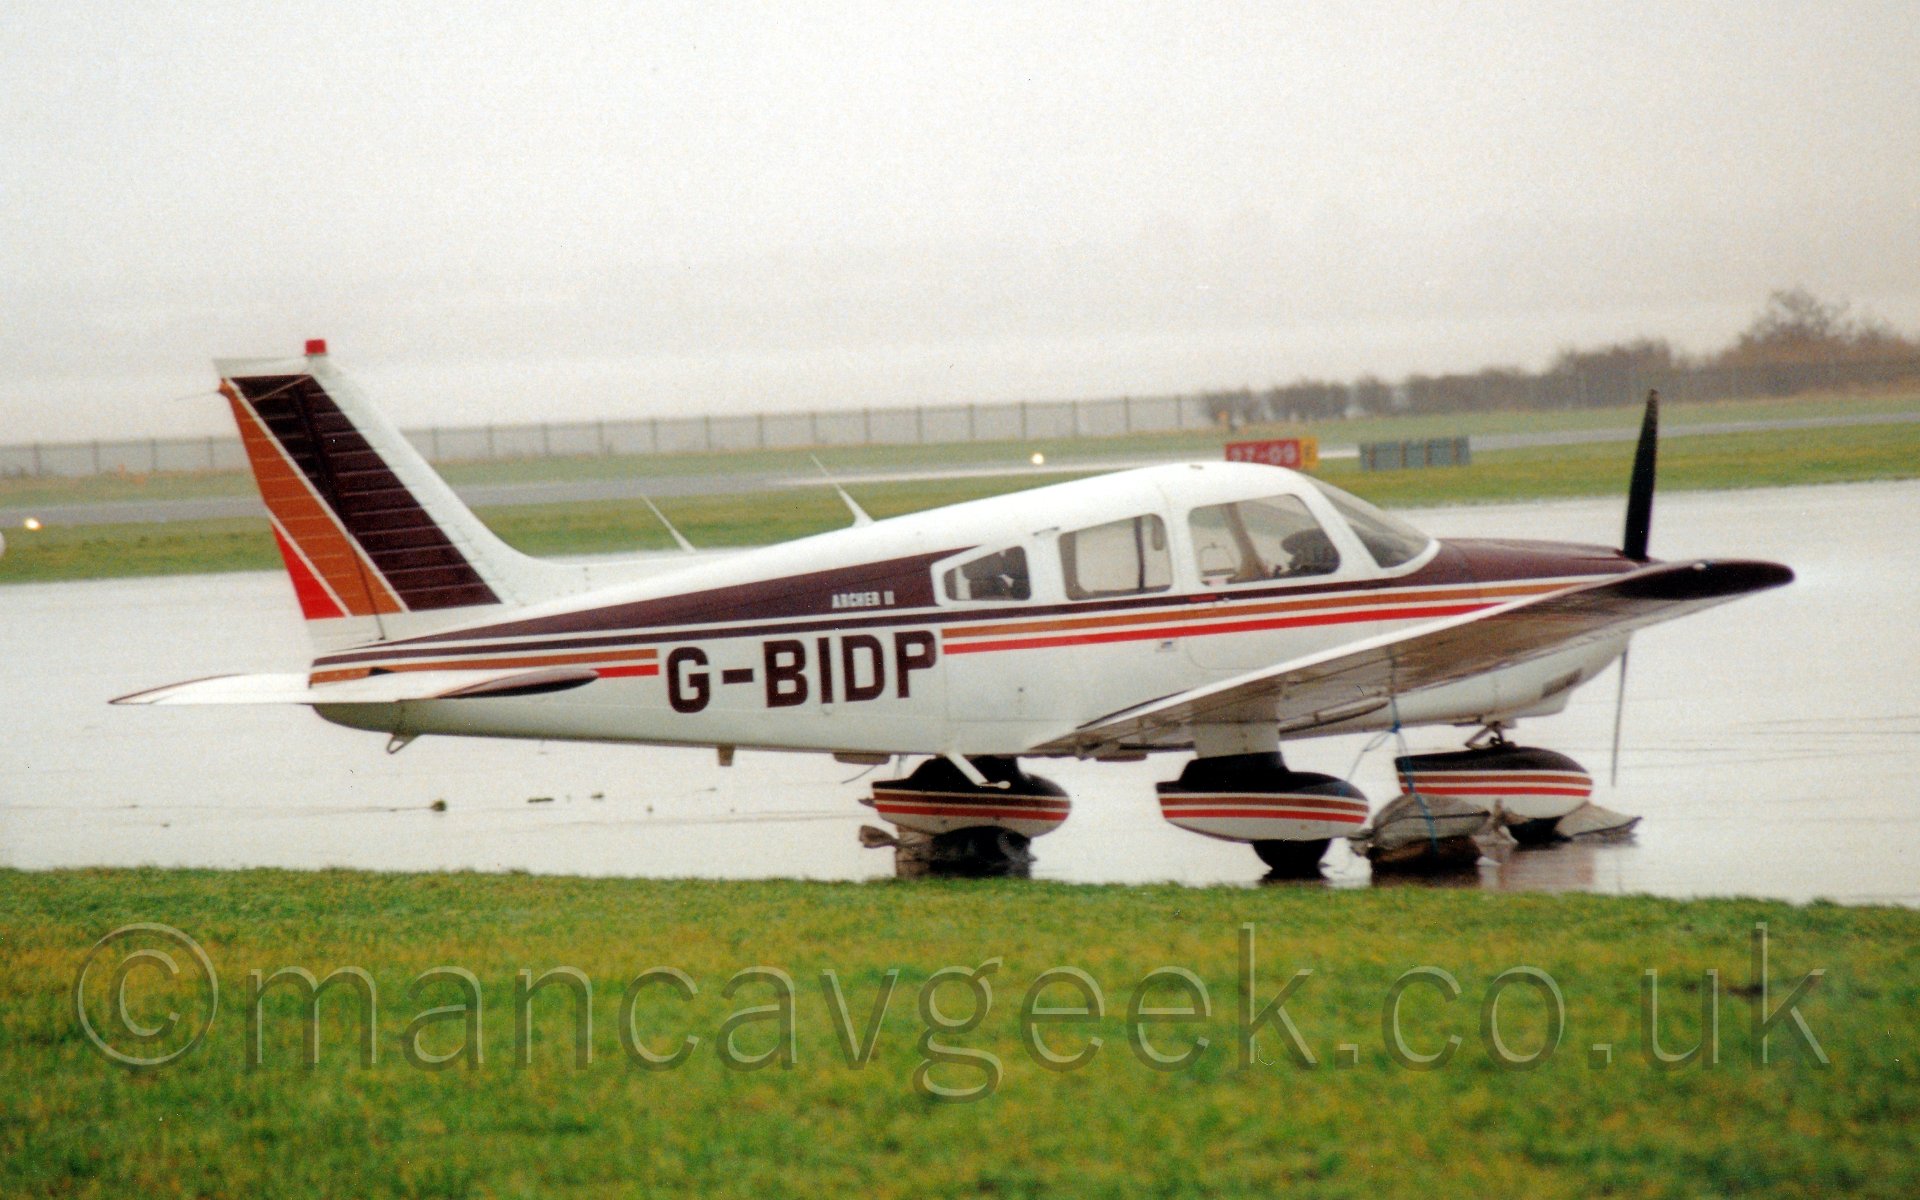 Side view of a single engined light aircraft parked facing to the right. The plane is mostly white, with a thick brown stripe covering most of the upper fuselage and thin orange and red stripes running along the middle of the body. The same design covers the spats over the fixed undercarriage, as well as on the tail. In the background, the rain-covered apron stretches off into the distance, giving way to grass which runs off to the airfield perimeter, vanishing in to the rain.